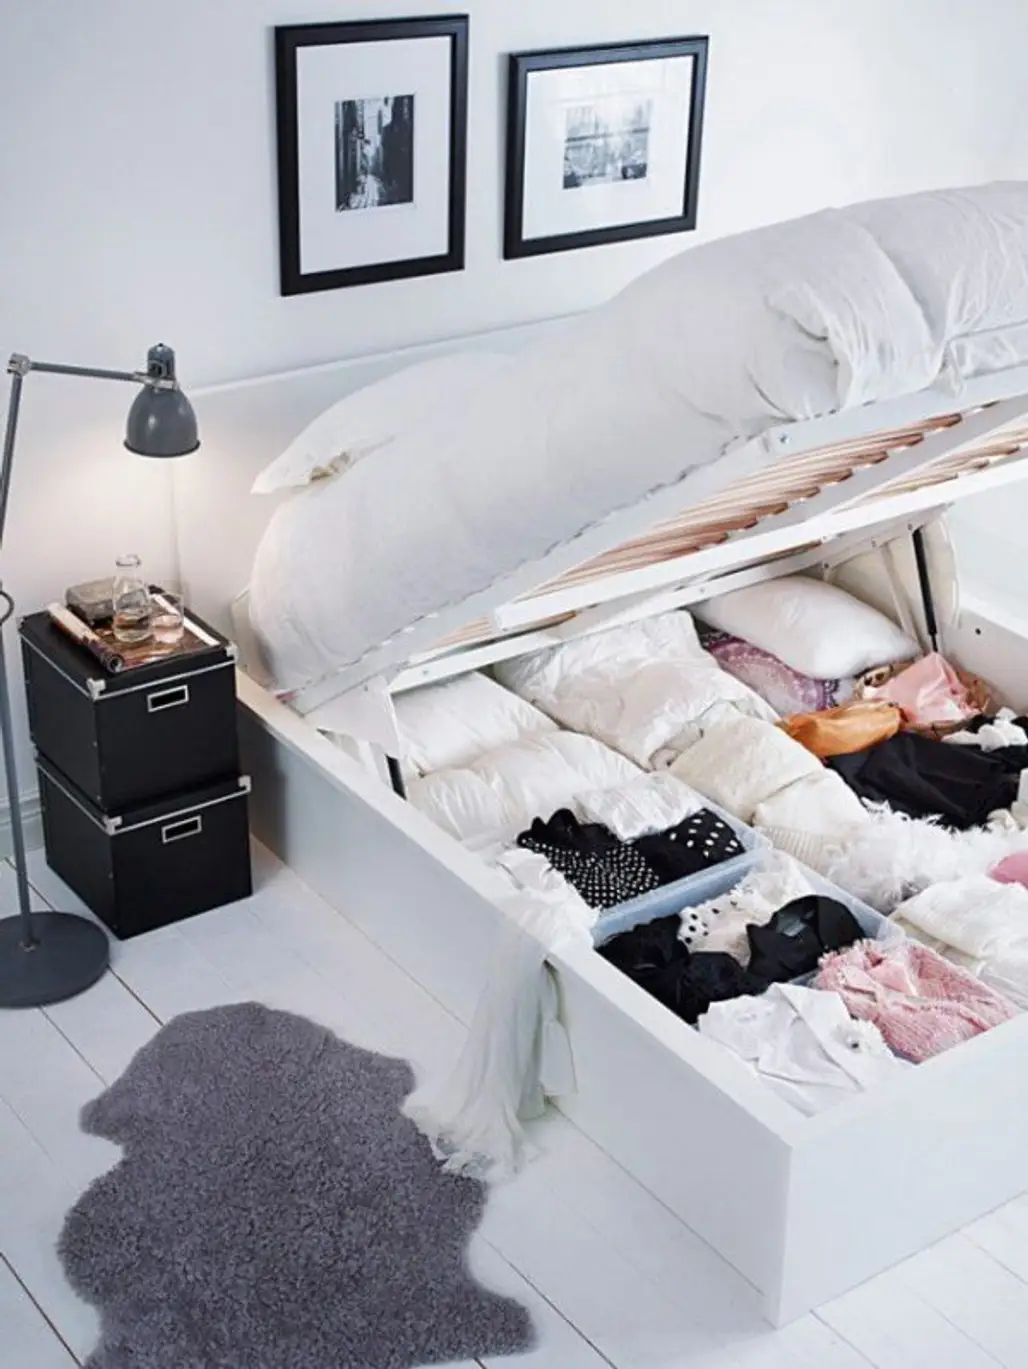 Store Clothes underneath Your Mattress